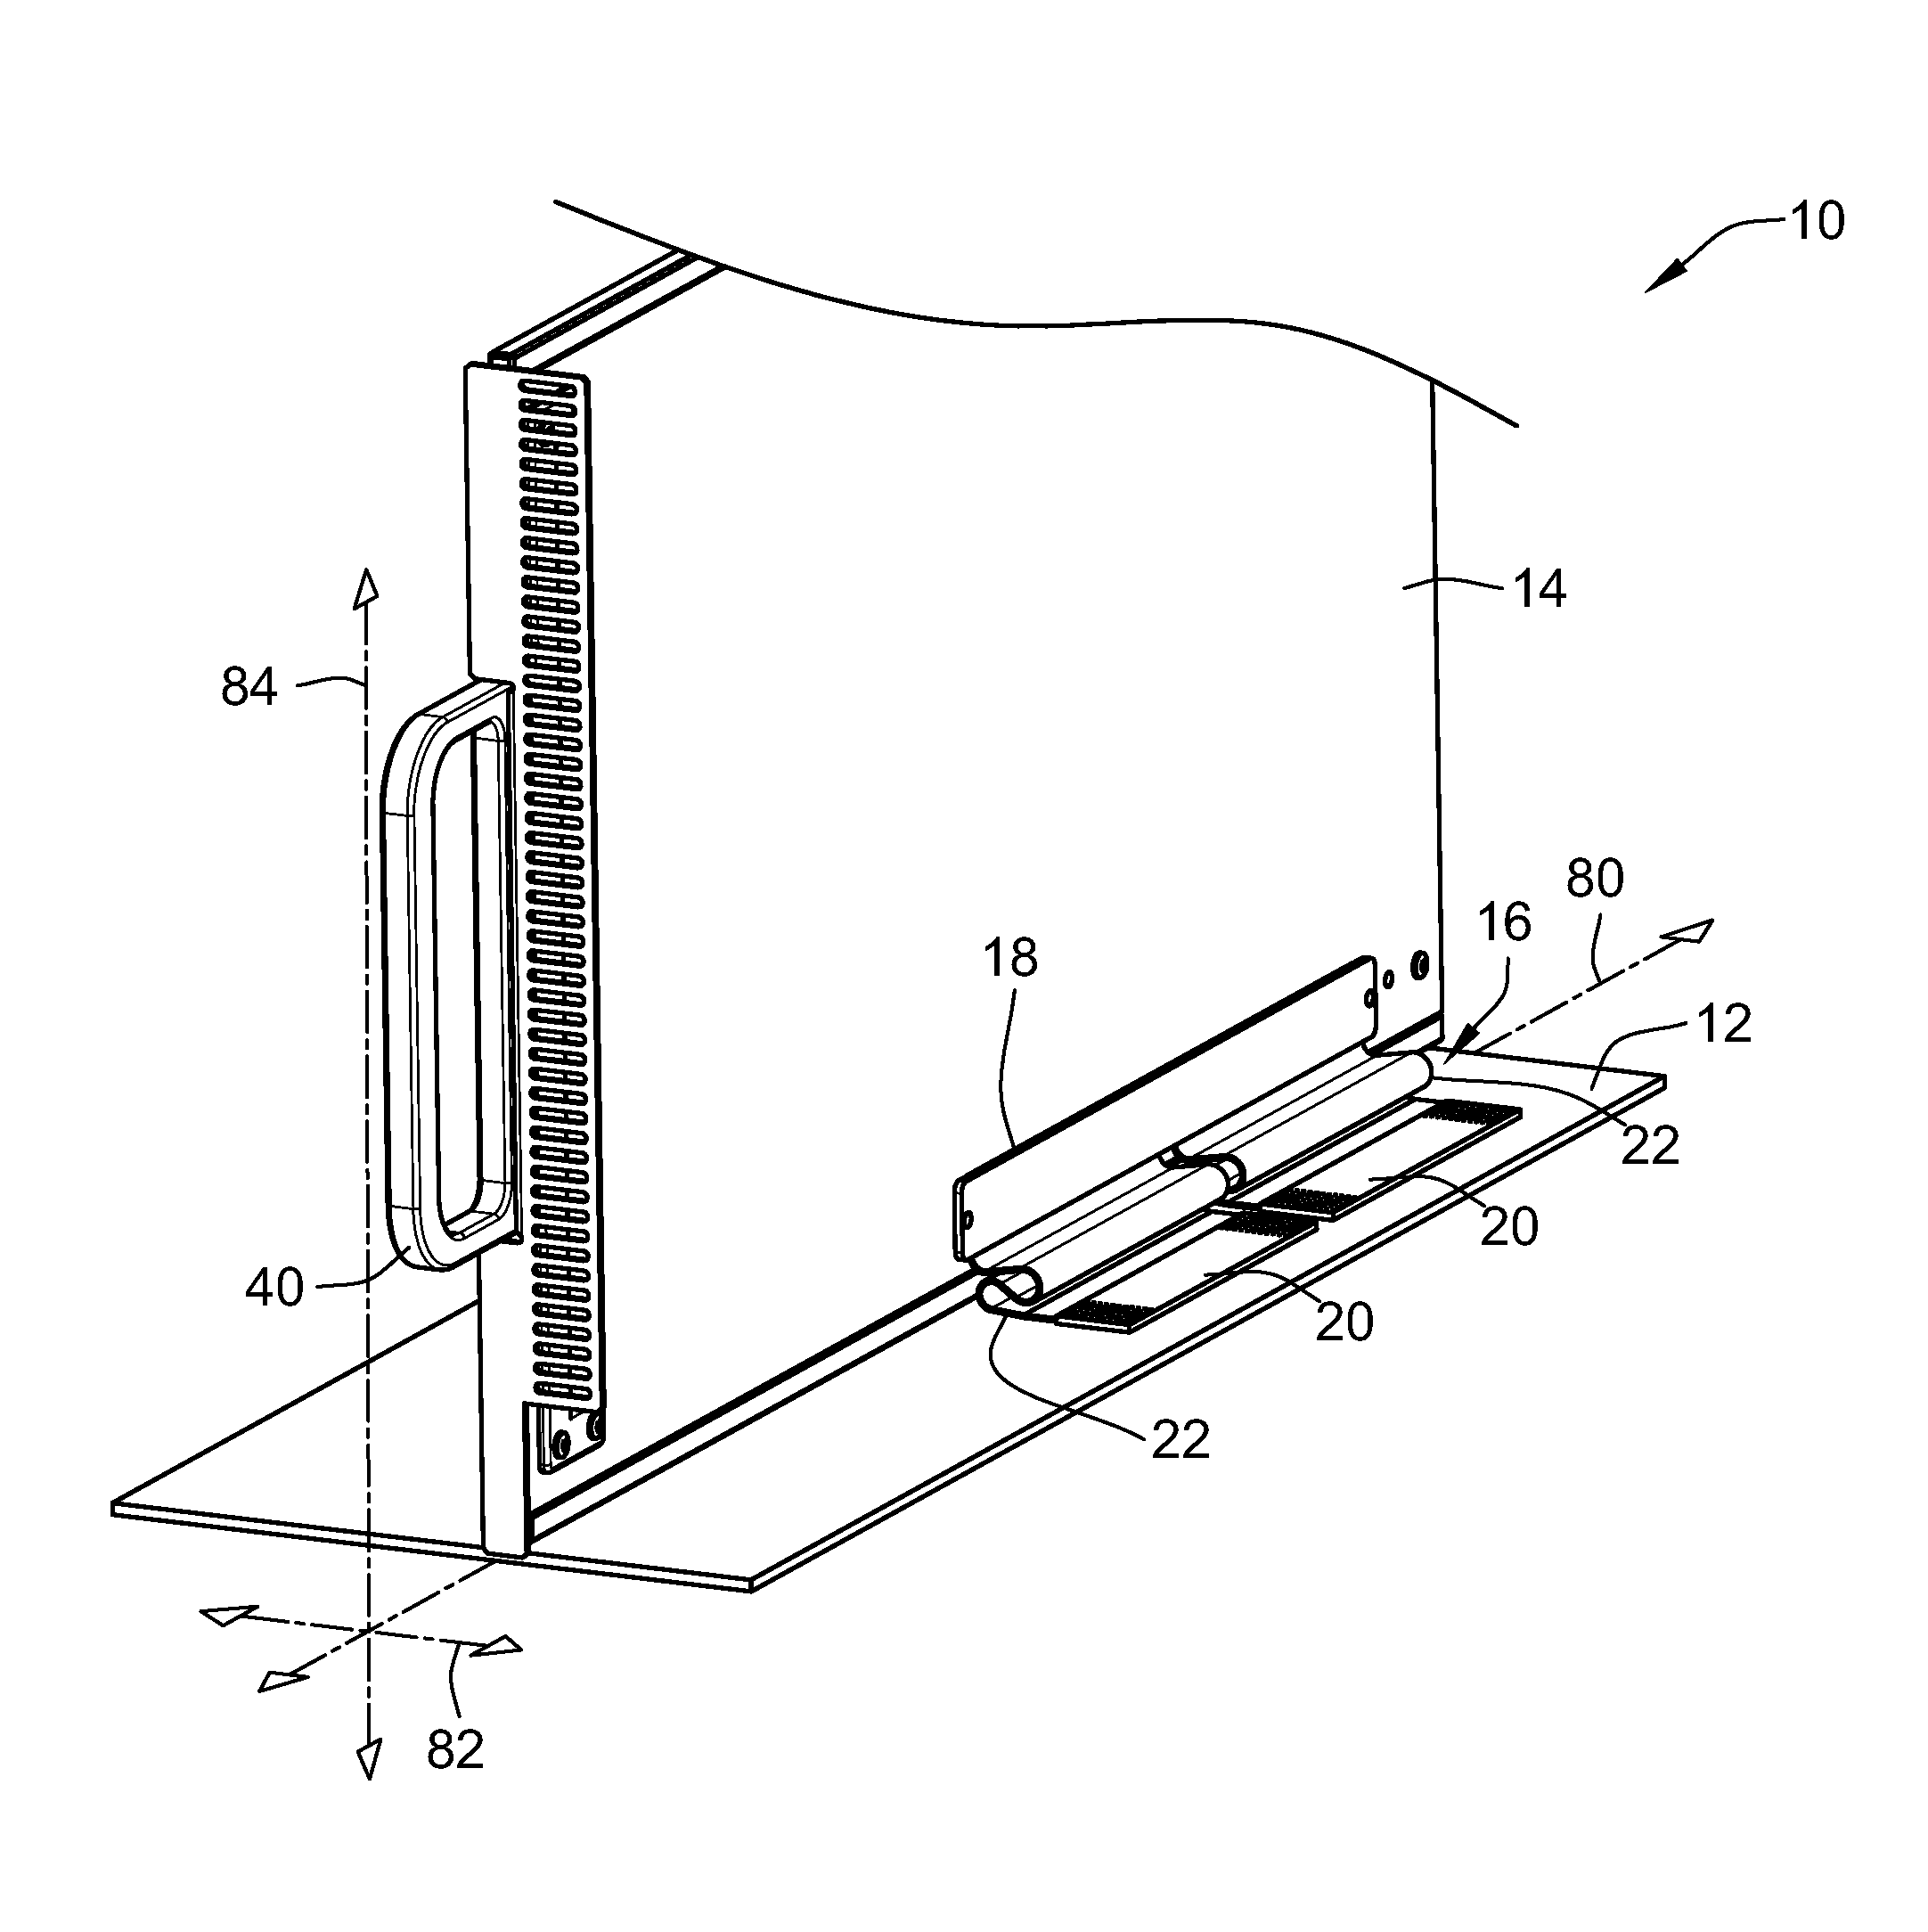 Connector assemblies and systems including flexible circuits